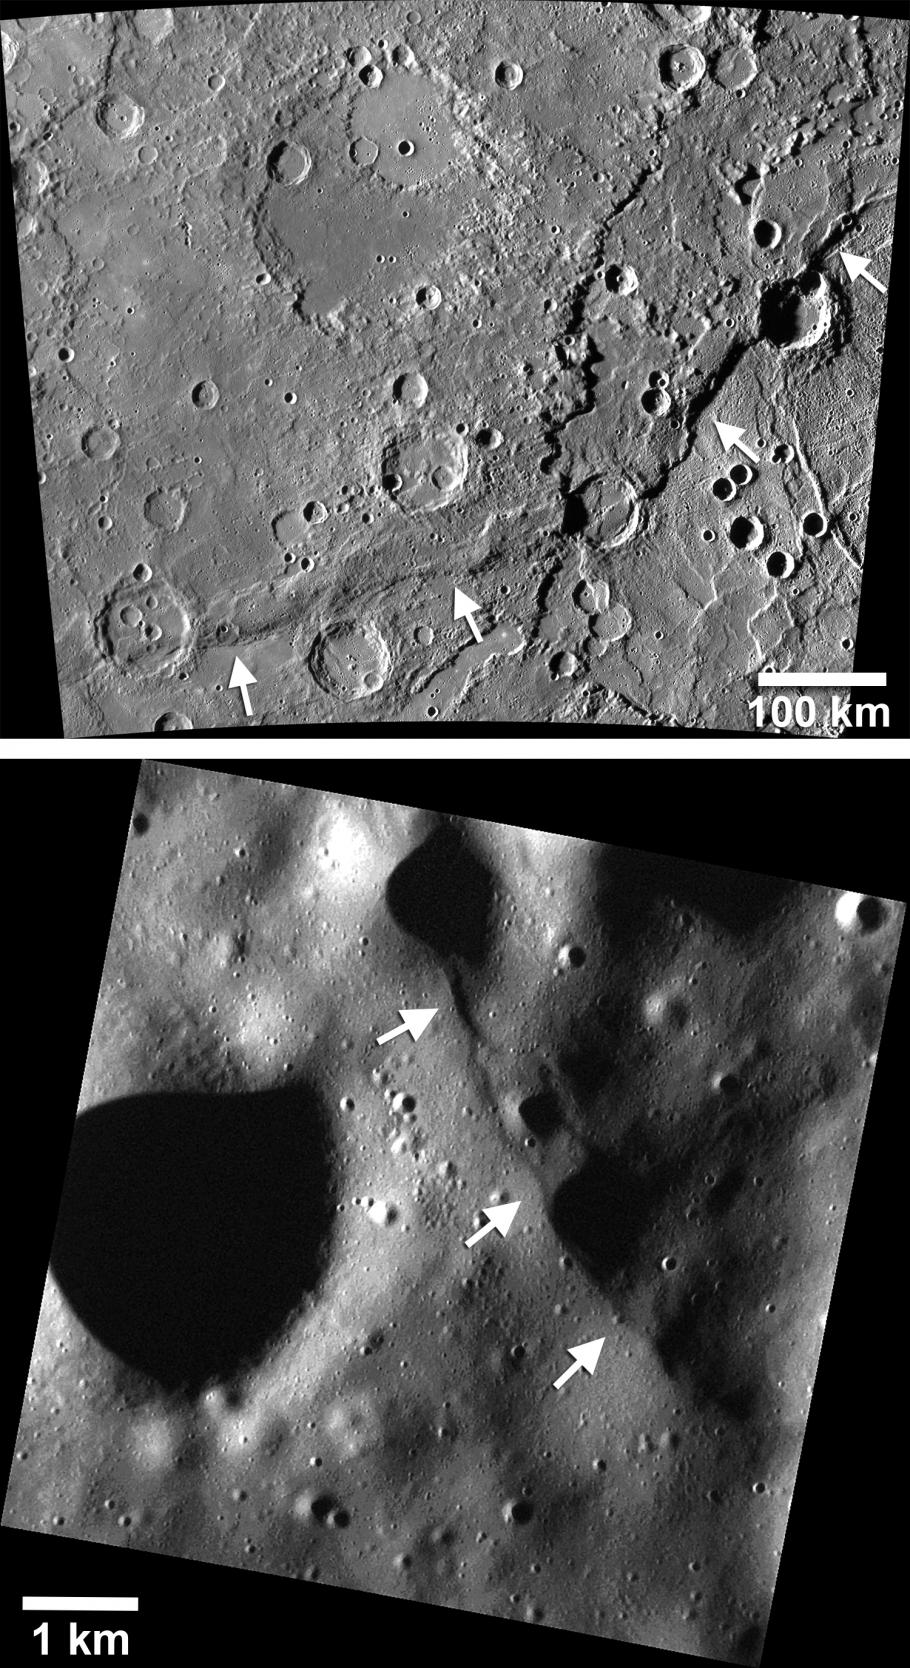 Two perspectives of the surface of Mercury show that tectonic landforms called lobate scarps (rising of land) are visible in large and small forms on the planet.